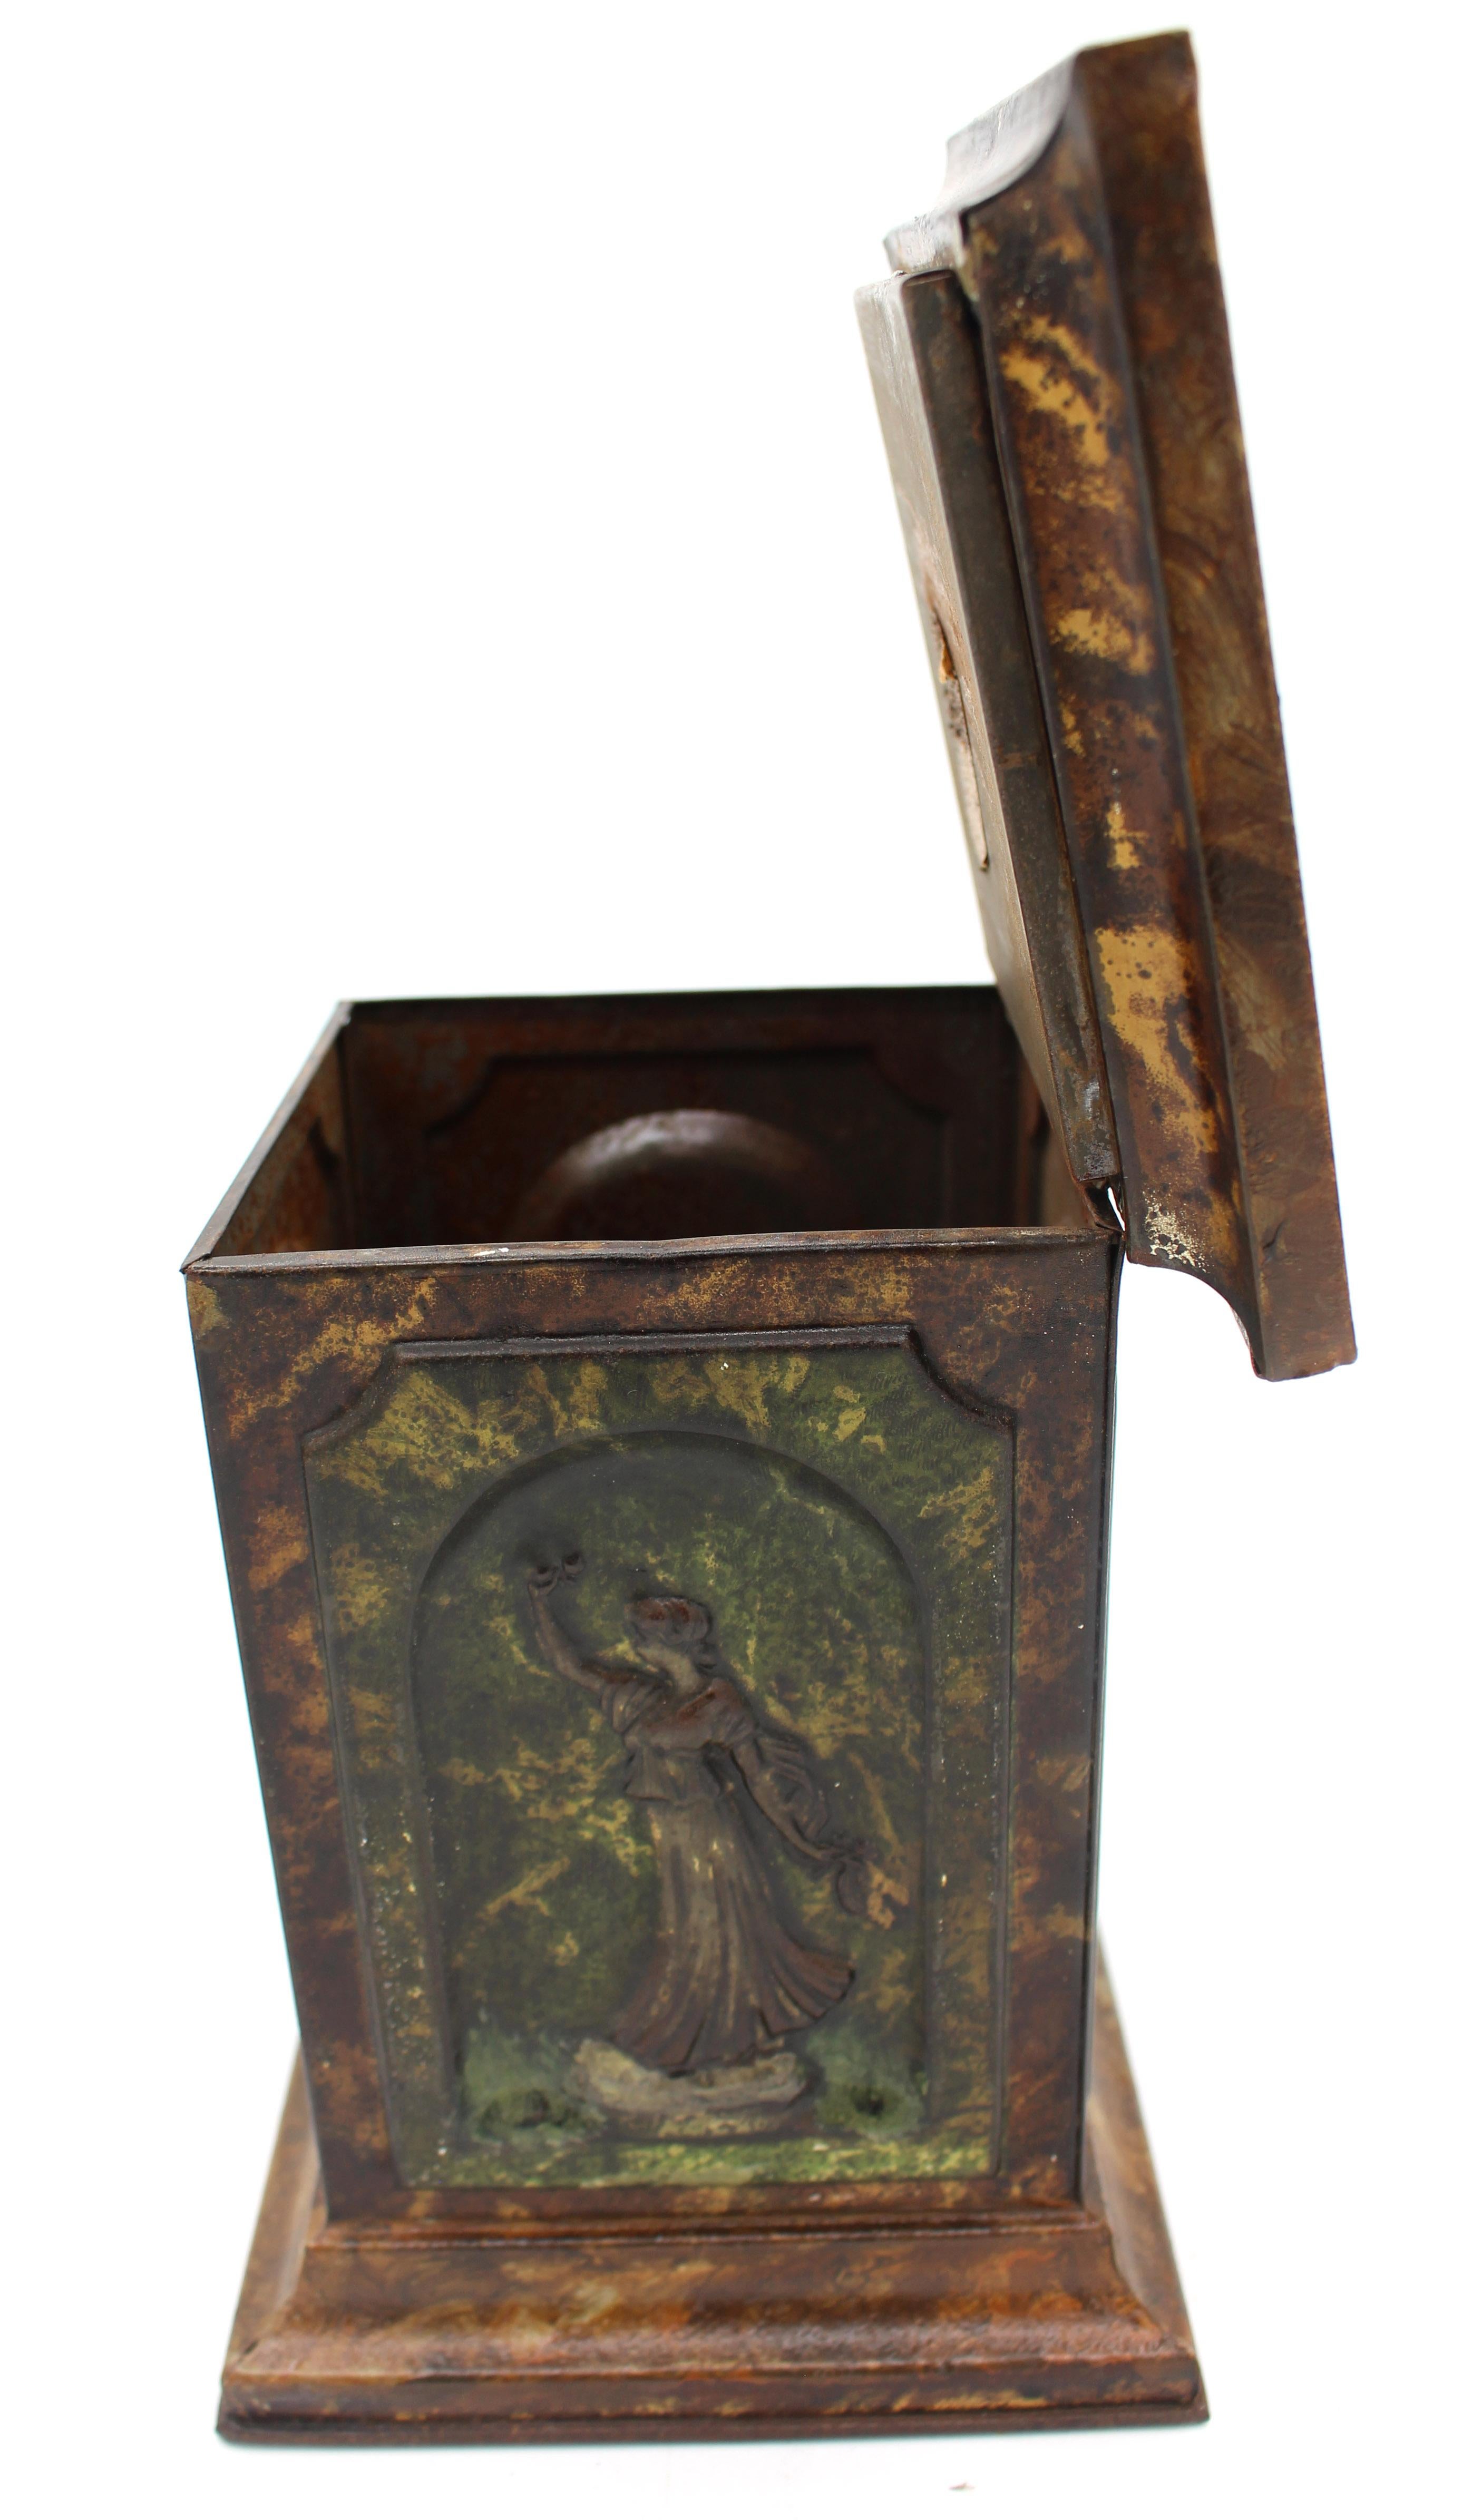 Pair of Huntley & Palmers Sculpture Pedestal Form Biscuit Tin Boxes, circa 1909 For Sale 3